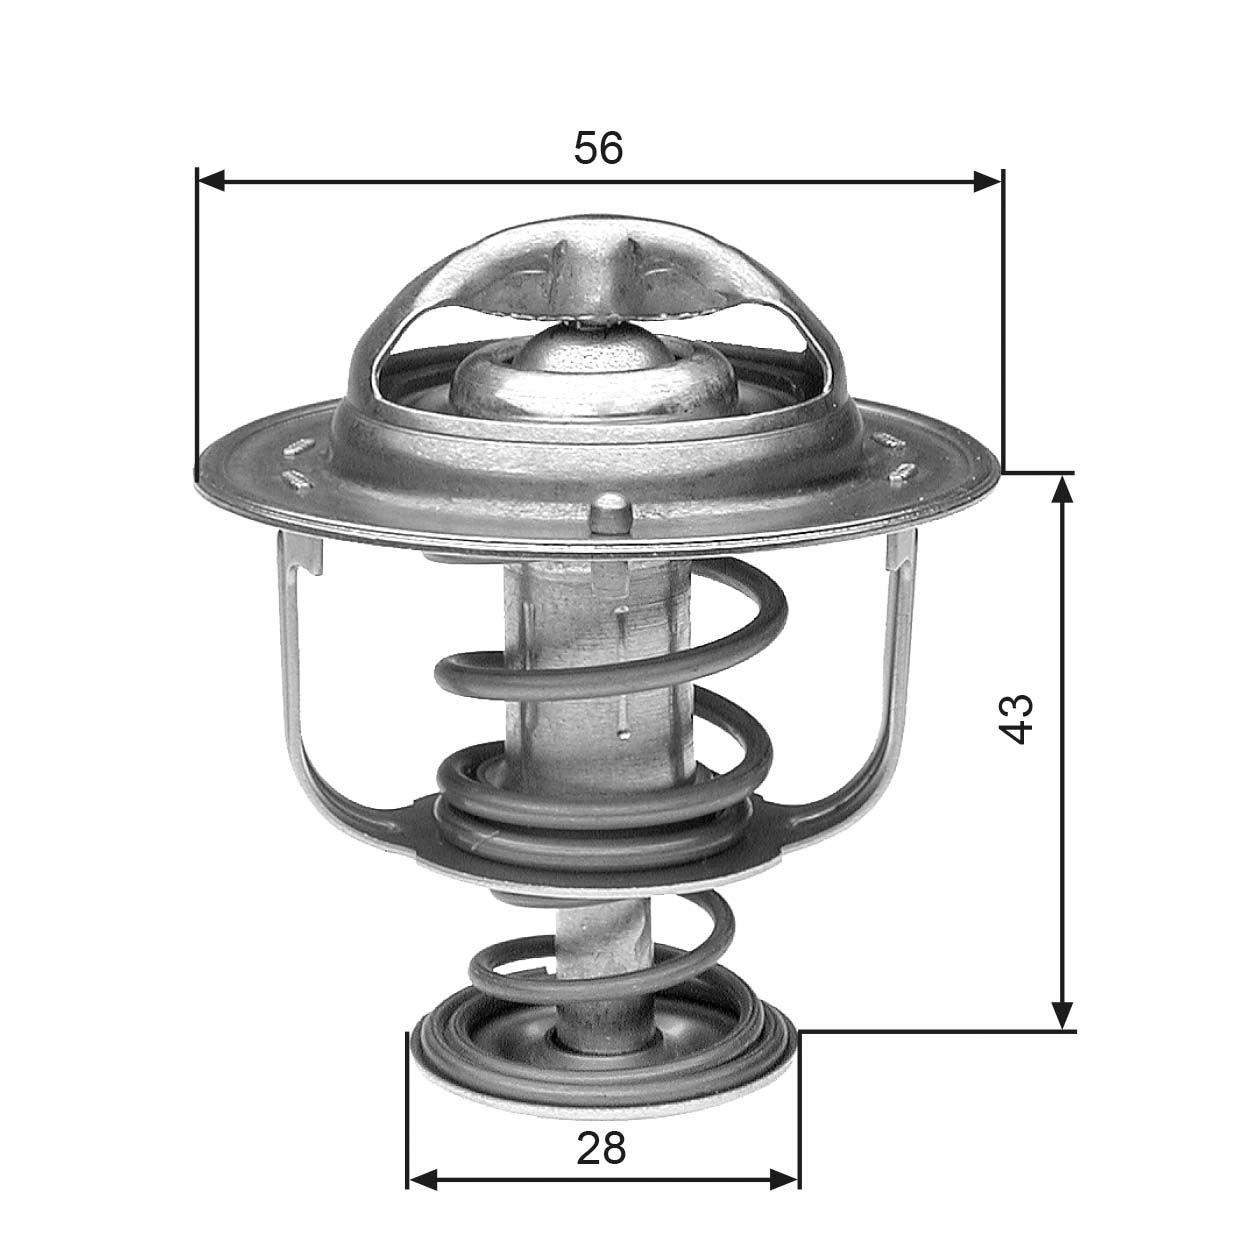 GATES TH31388G1 Engine thermostat Opening Temperature: 88°C, with gaskets/seals, without housing